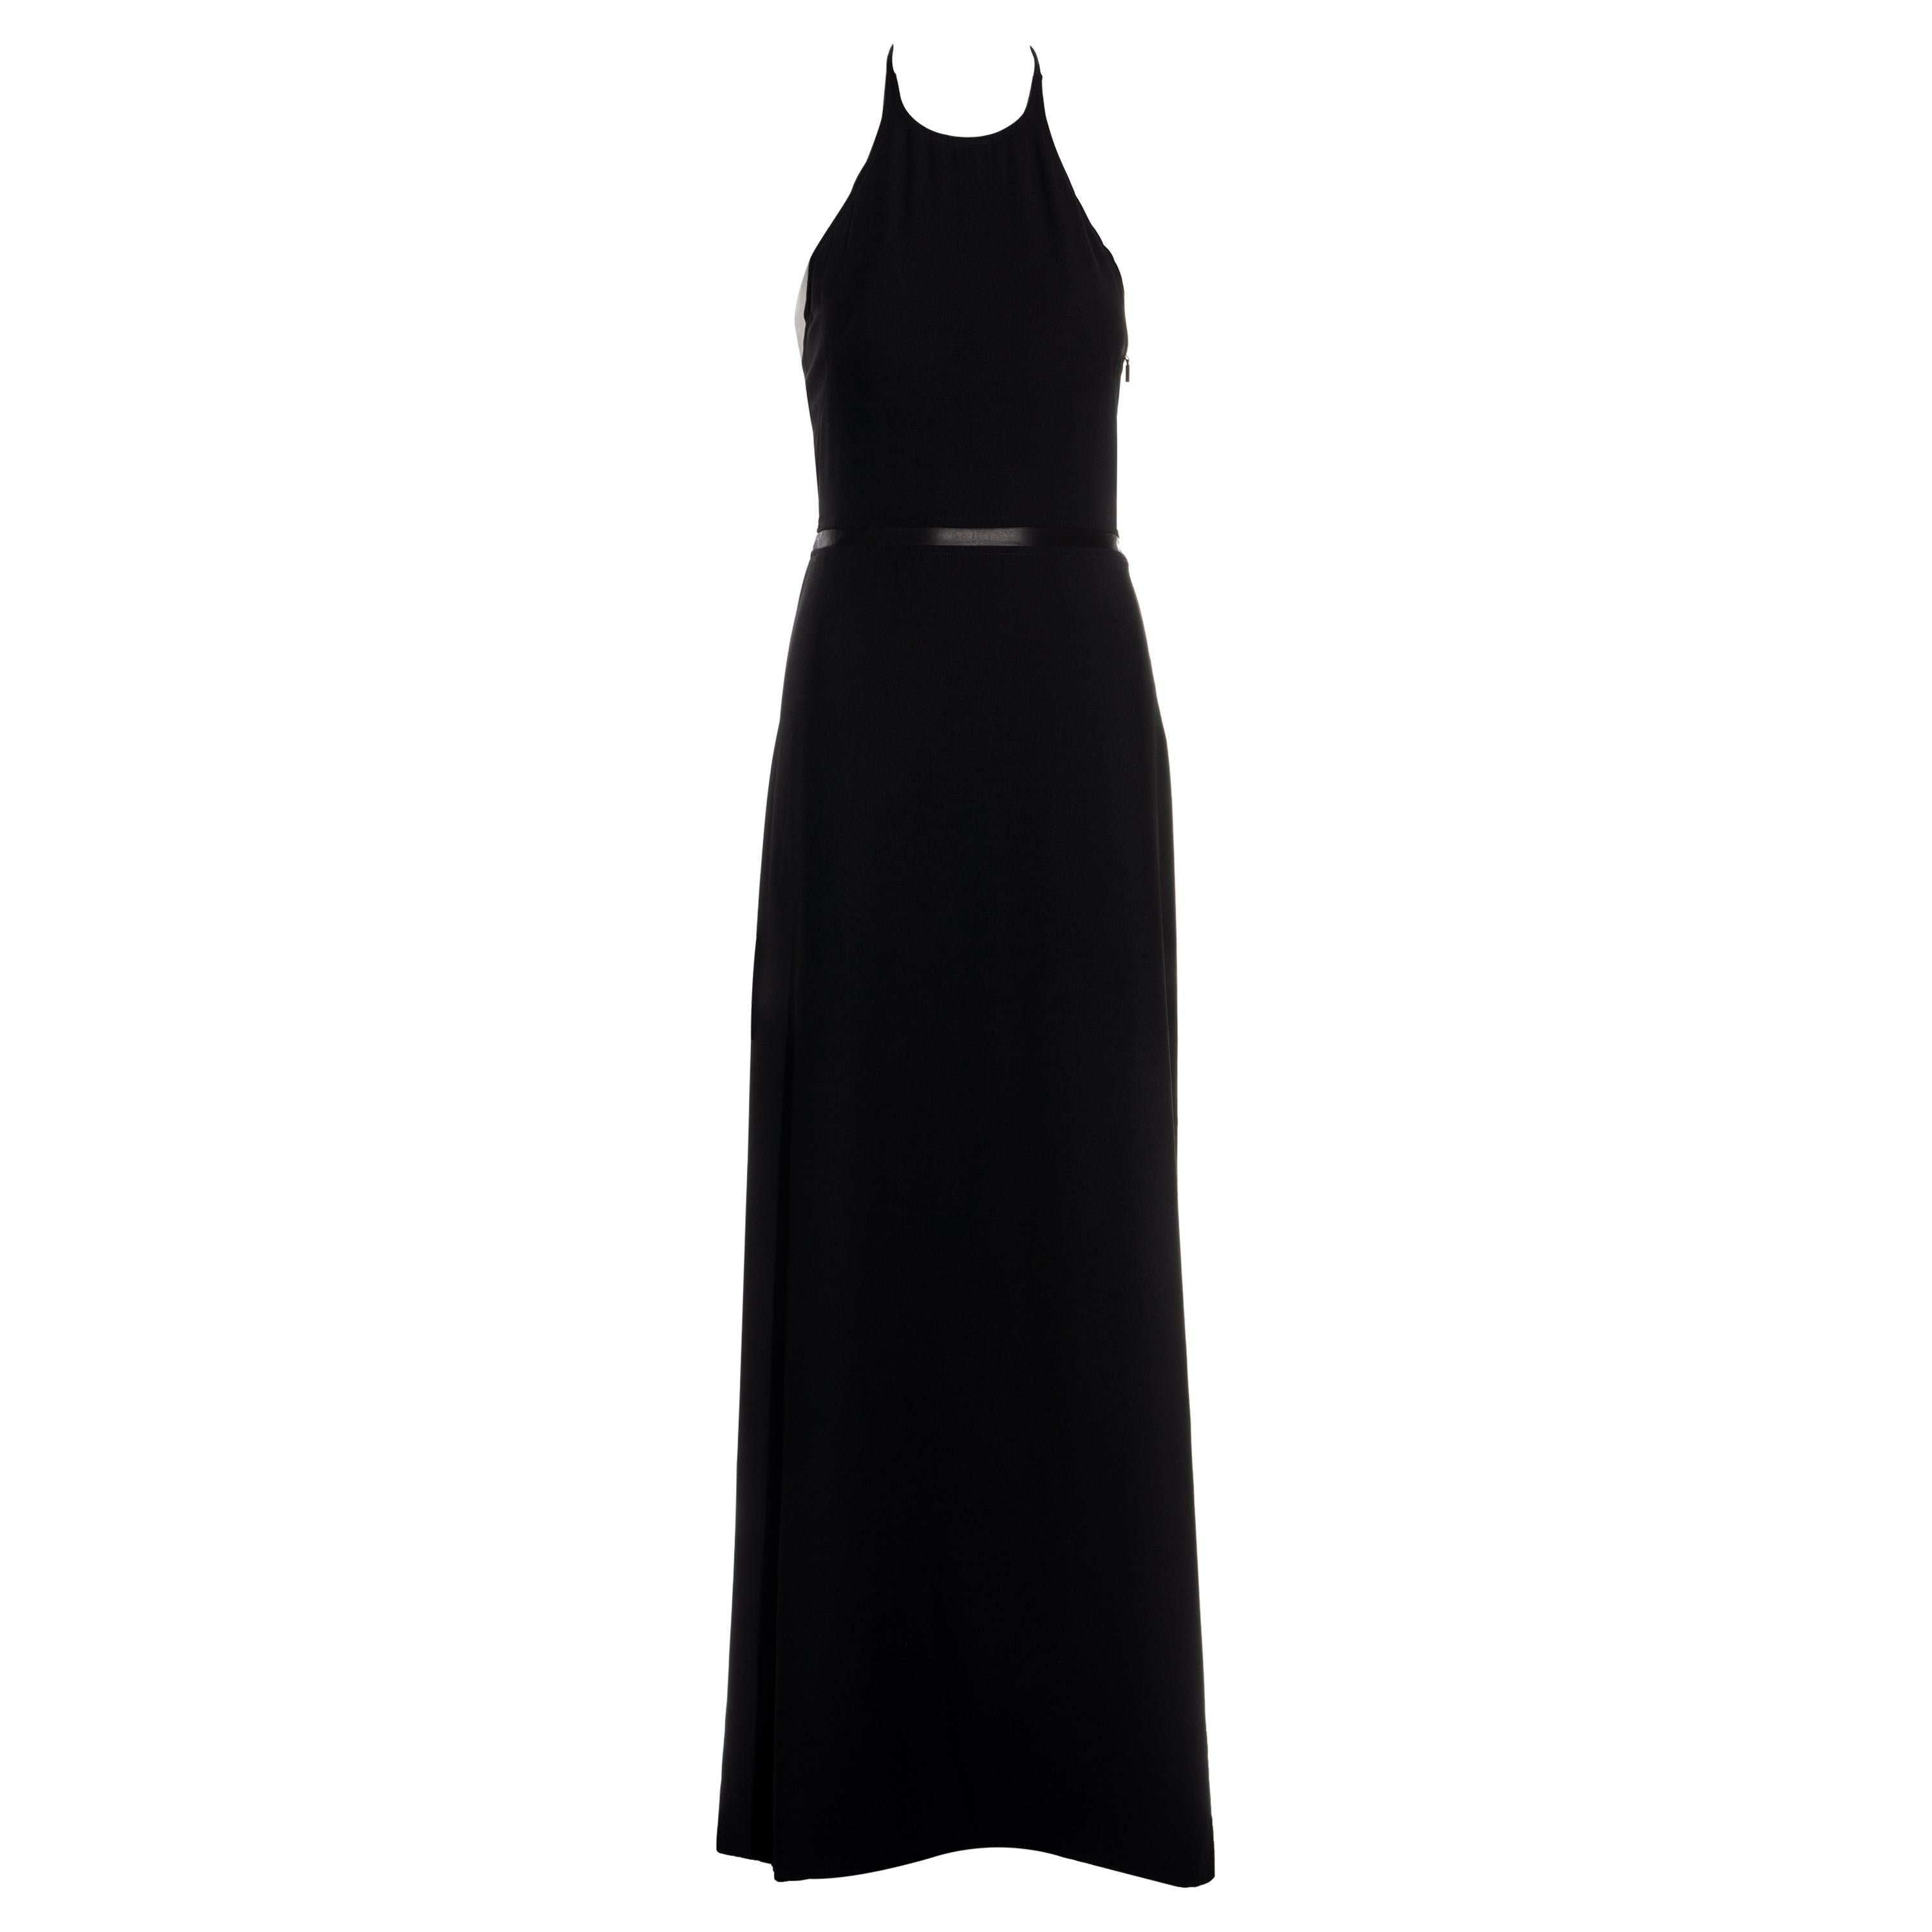 Gucci by Tom Ford black wool and leather halter neck evening dress, fw 2000